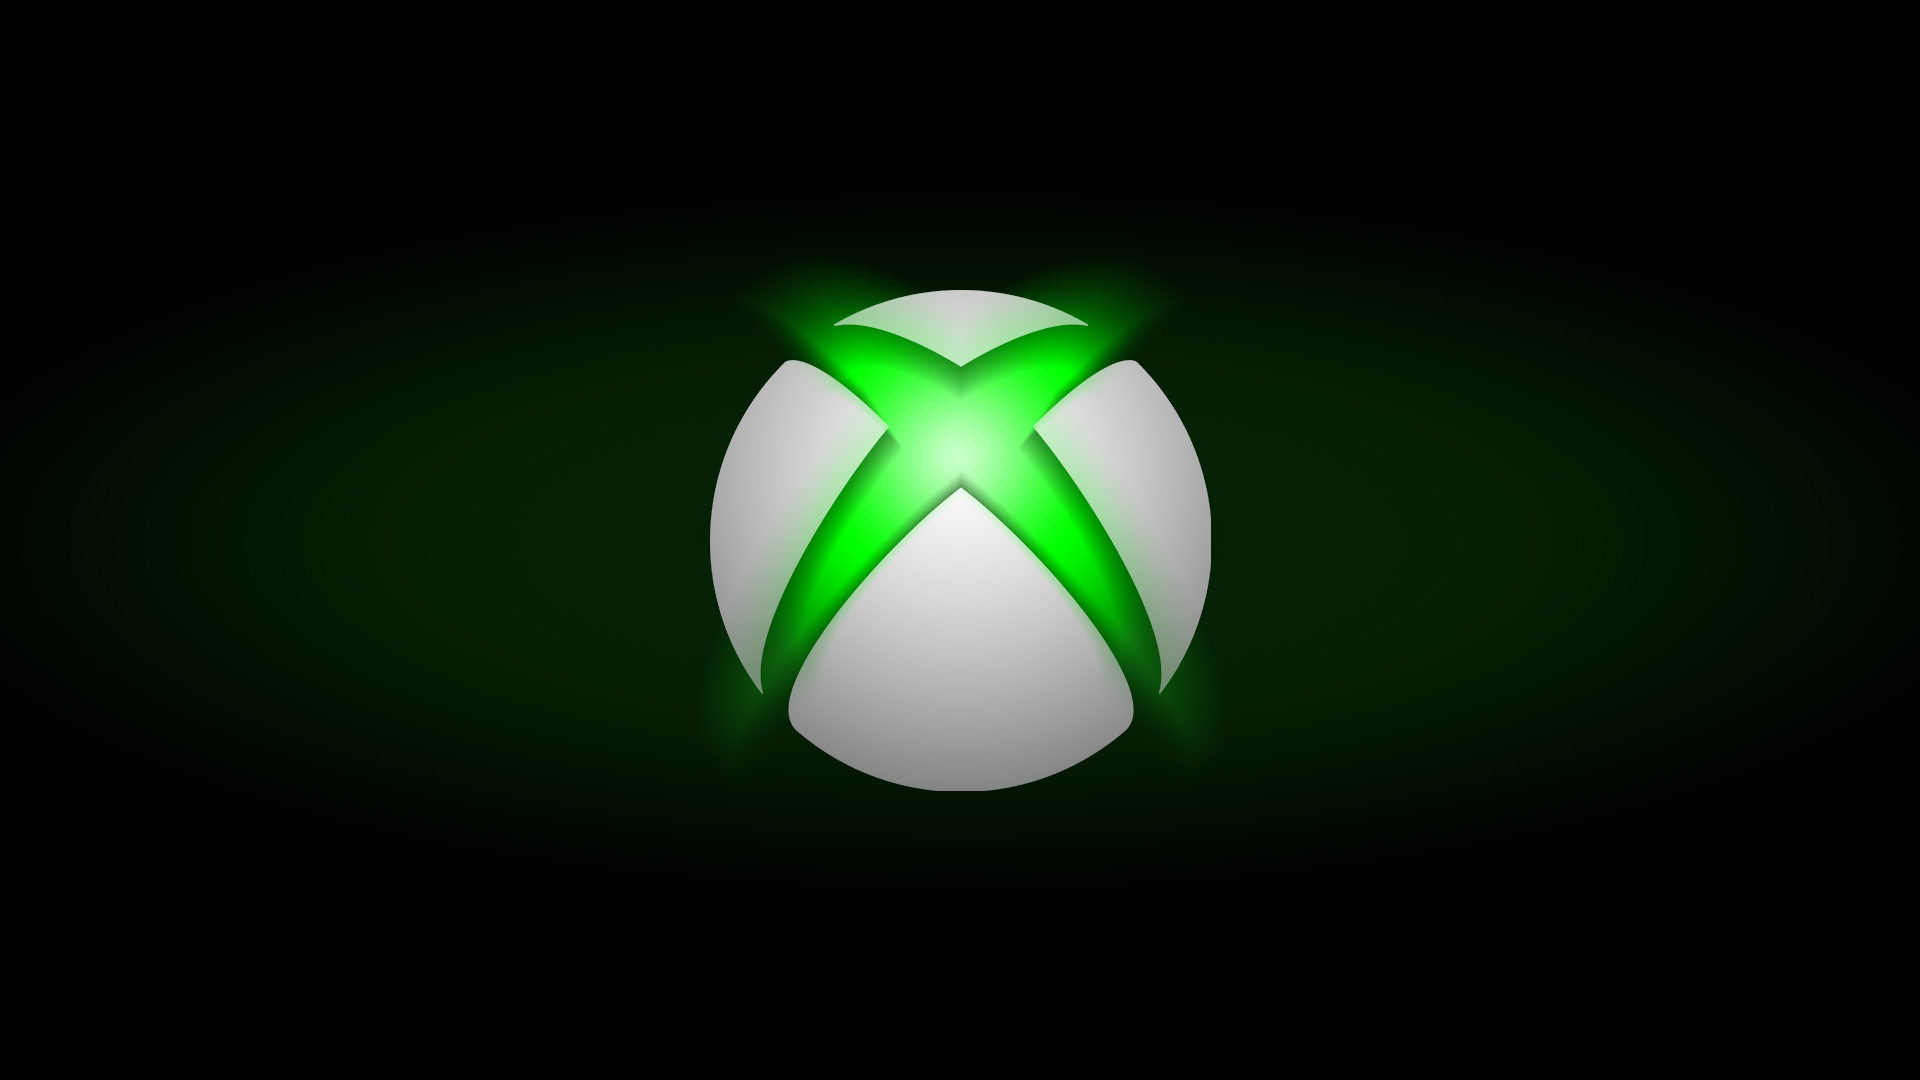 Cool XboxWallpapers